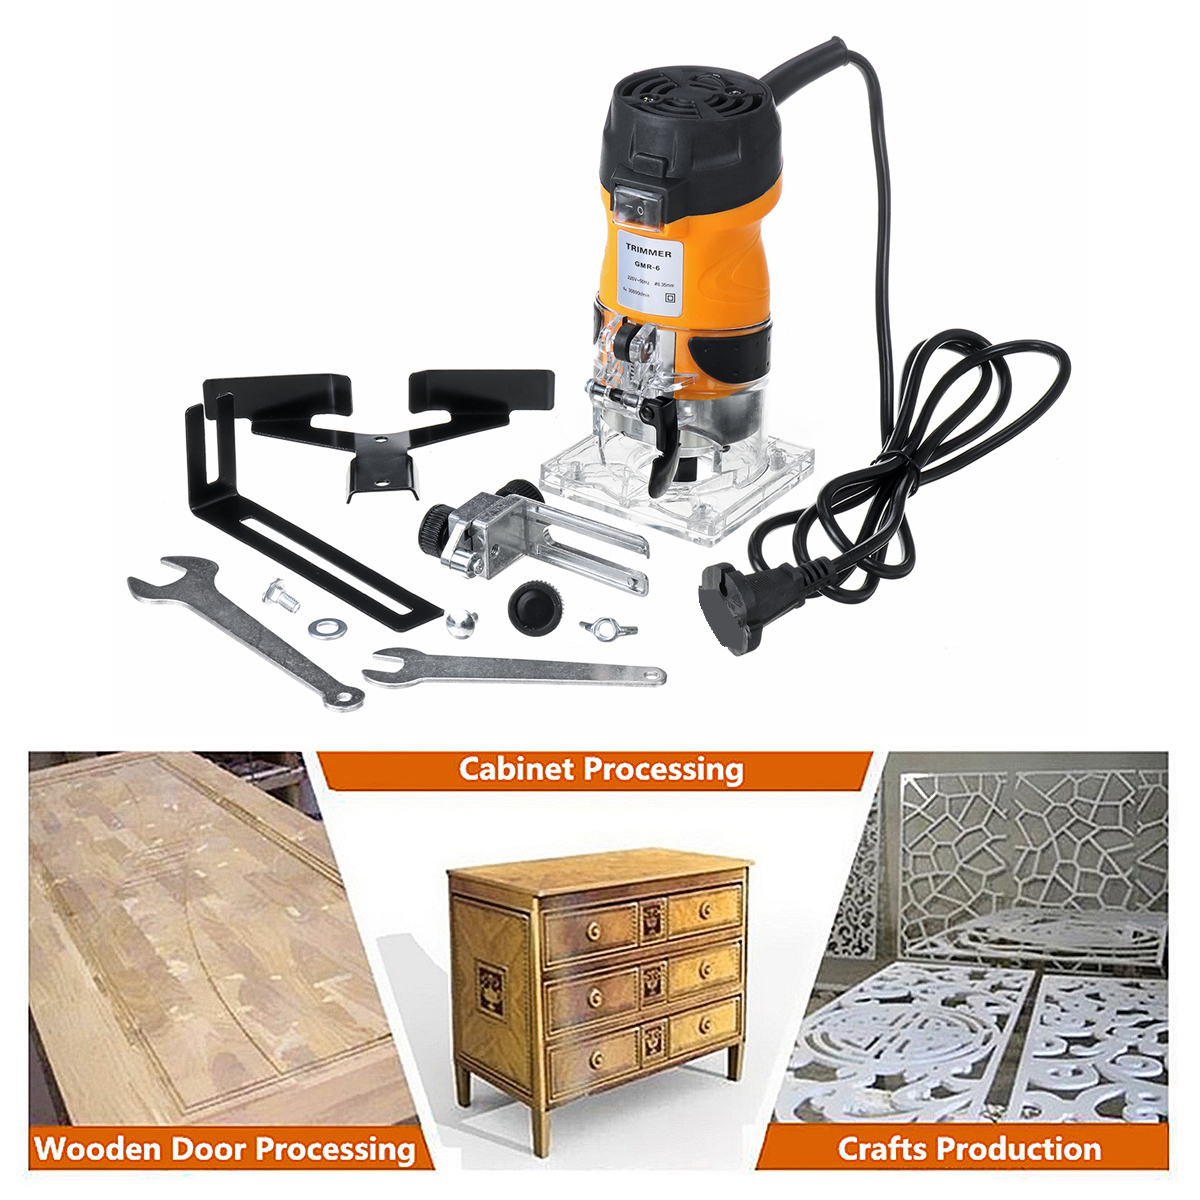 220V-2200W-635mm-Electric-Handheld-Machine-Trimmer-6-Gear-Adjustable-Woodworking-Palm-Router-Wood-Ca-1625377-6